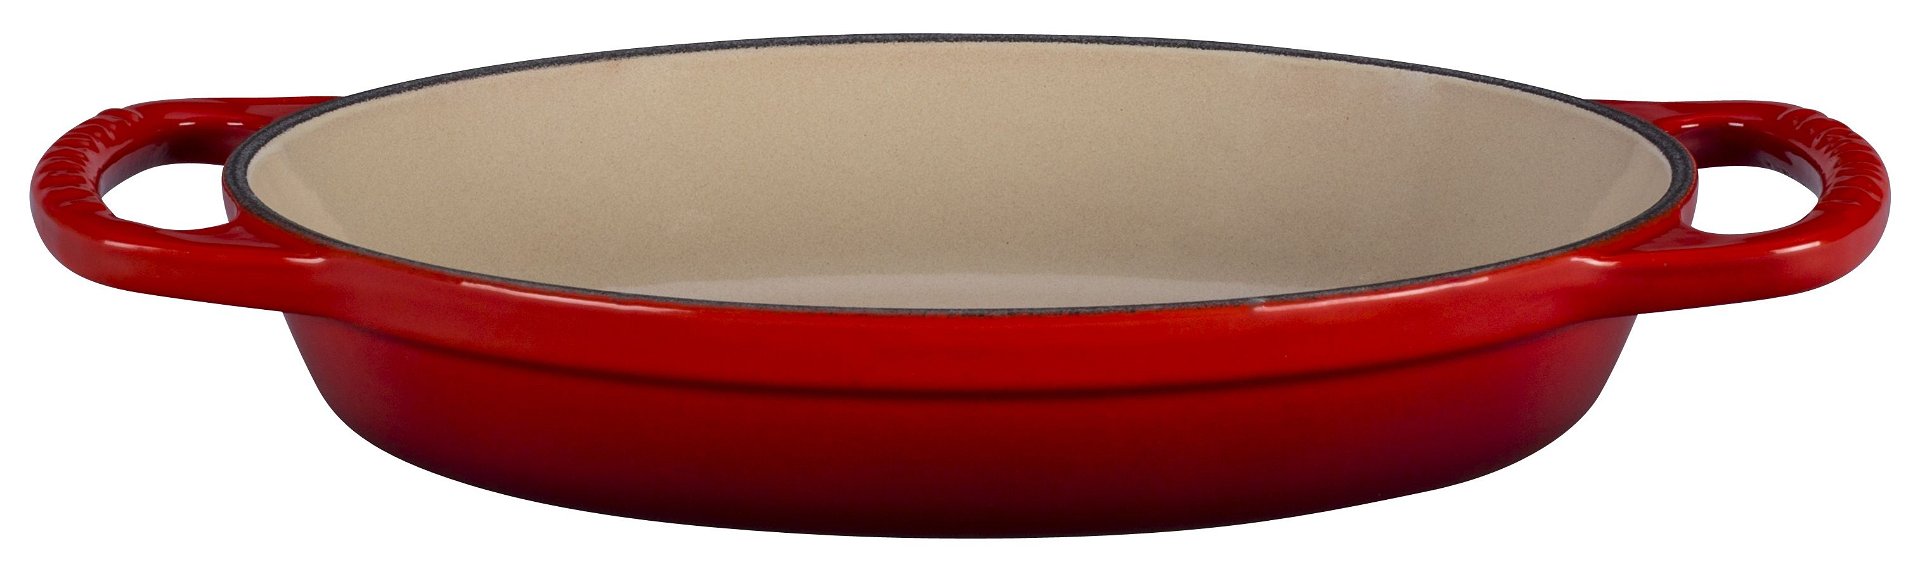 Gourmet Accessories, Stainless Steel Oval Baker with 2 Red Pot Holders, 15  inch